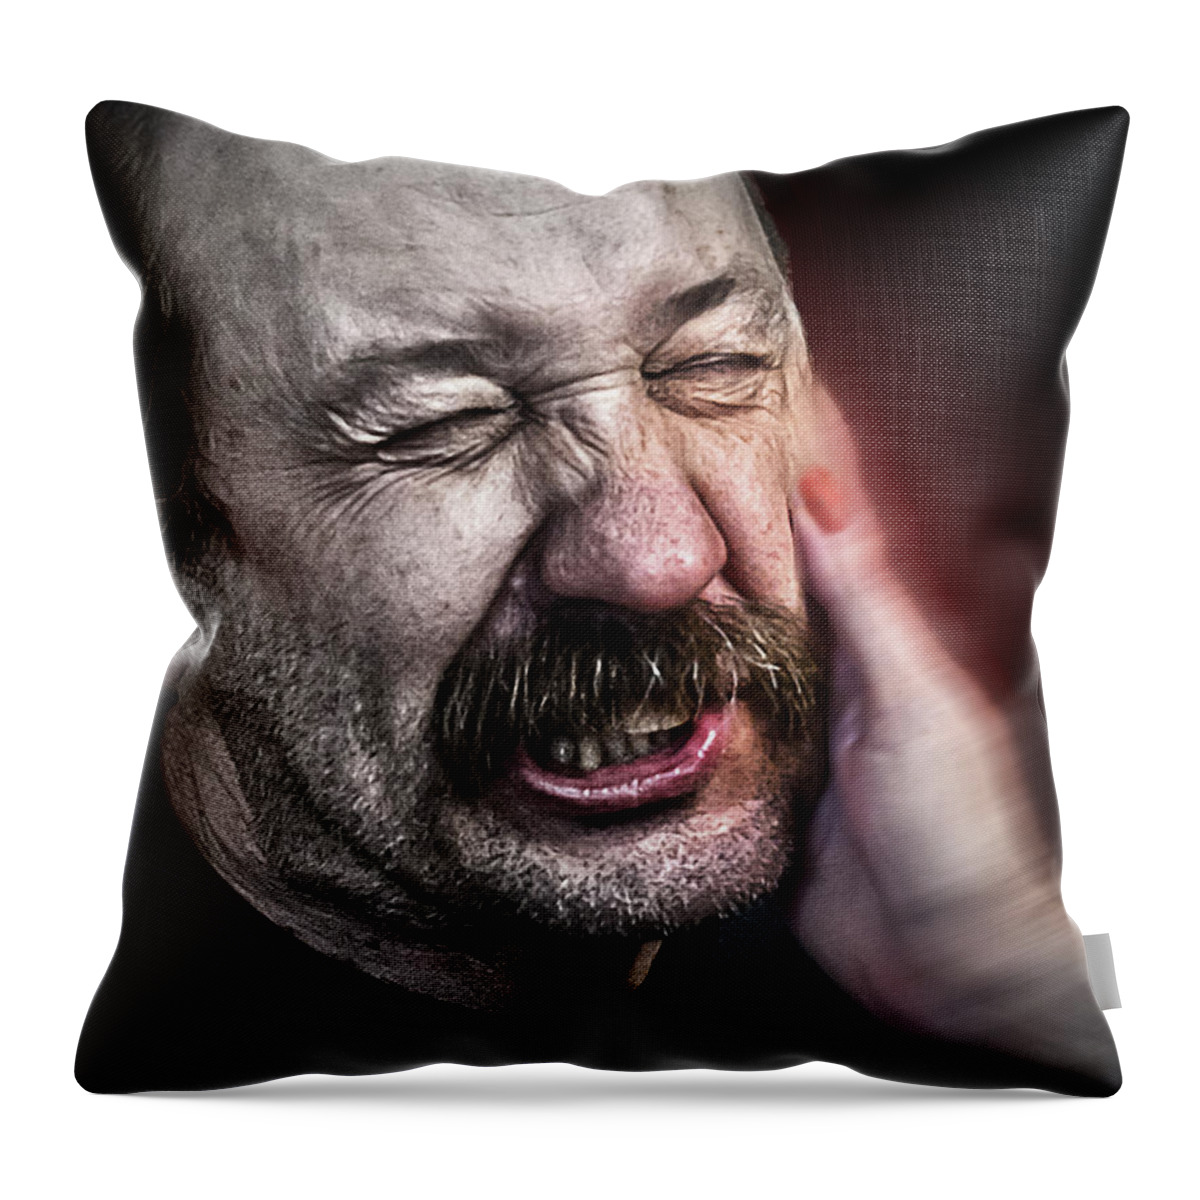 Slap Throw Pillow featuring the photograph The Slap by Rick Mosher